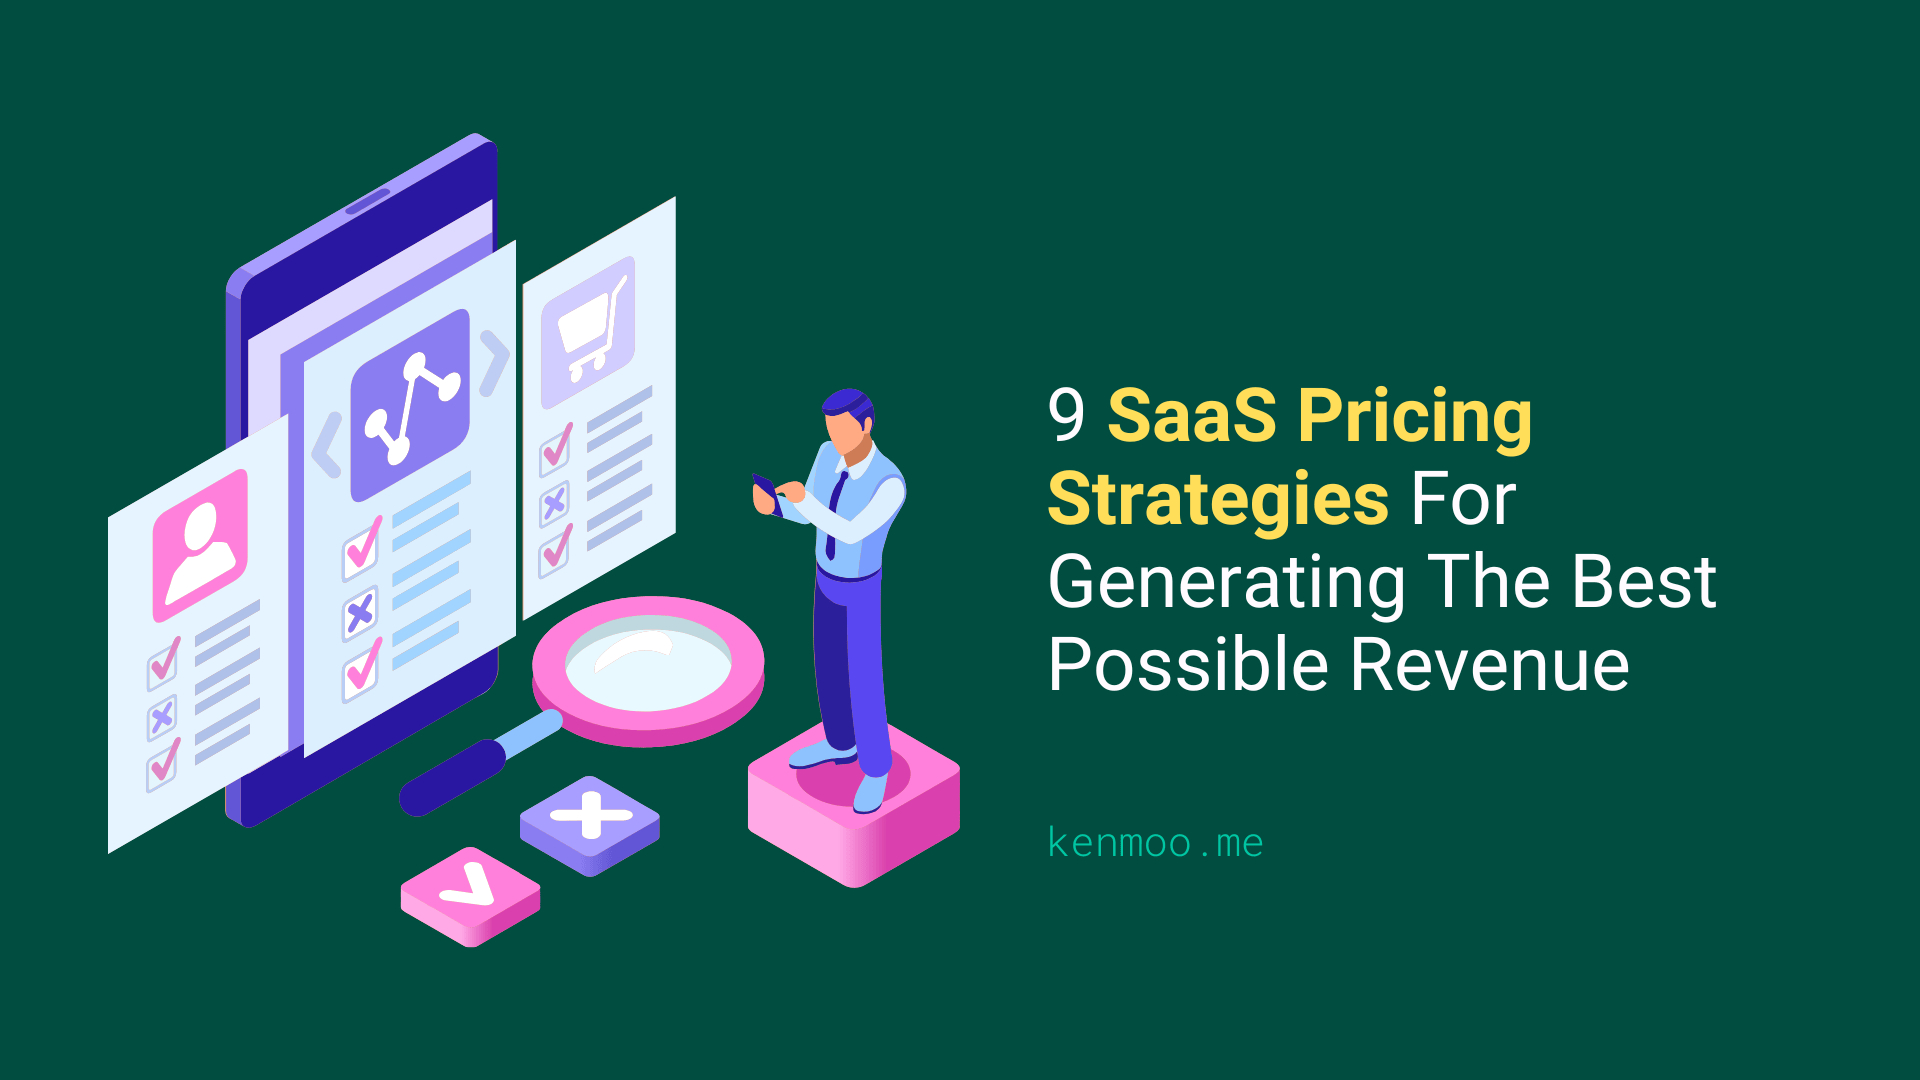 10 SaaS Pricing Strategies For Generating The Best Possible Revenue